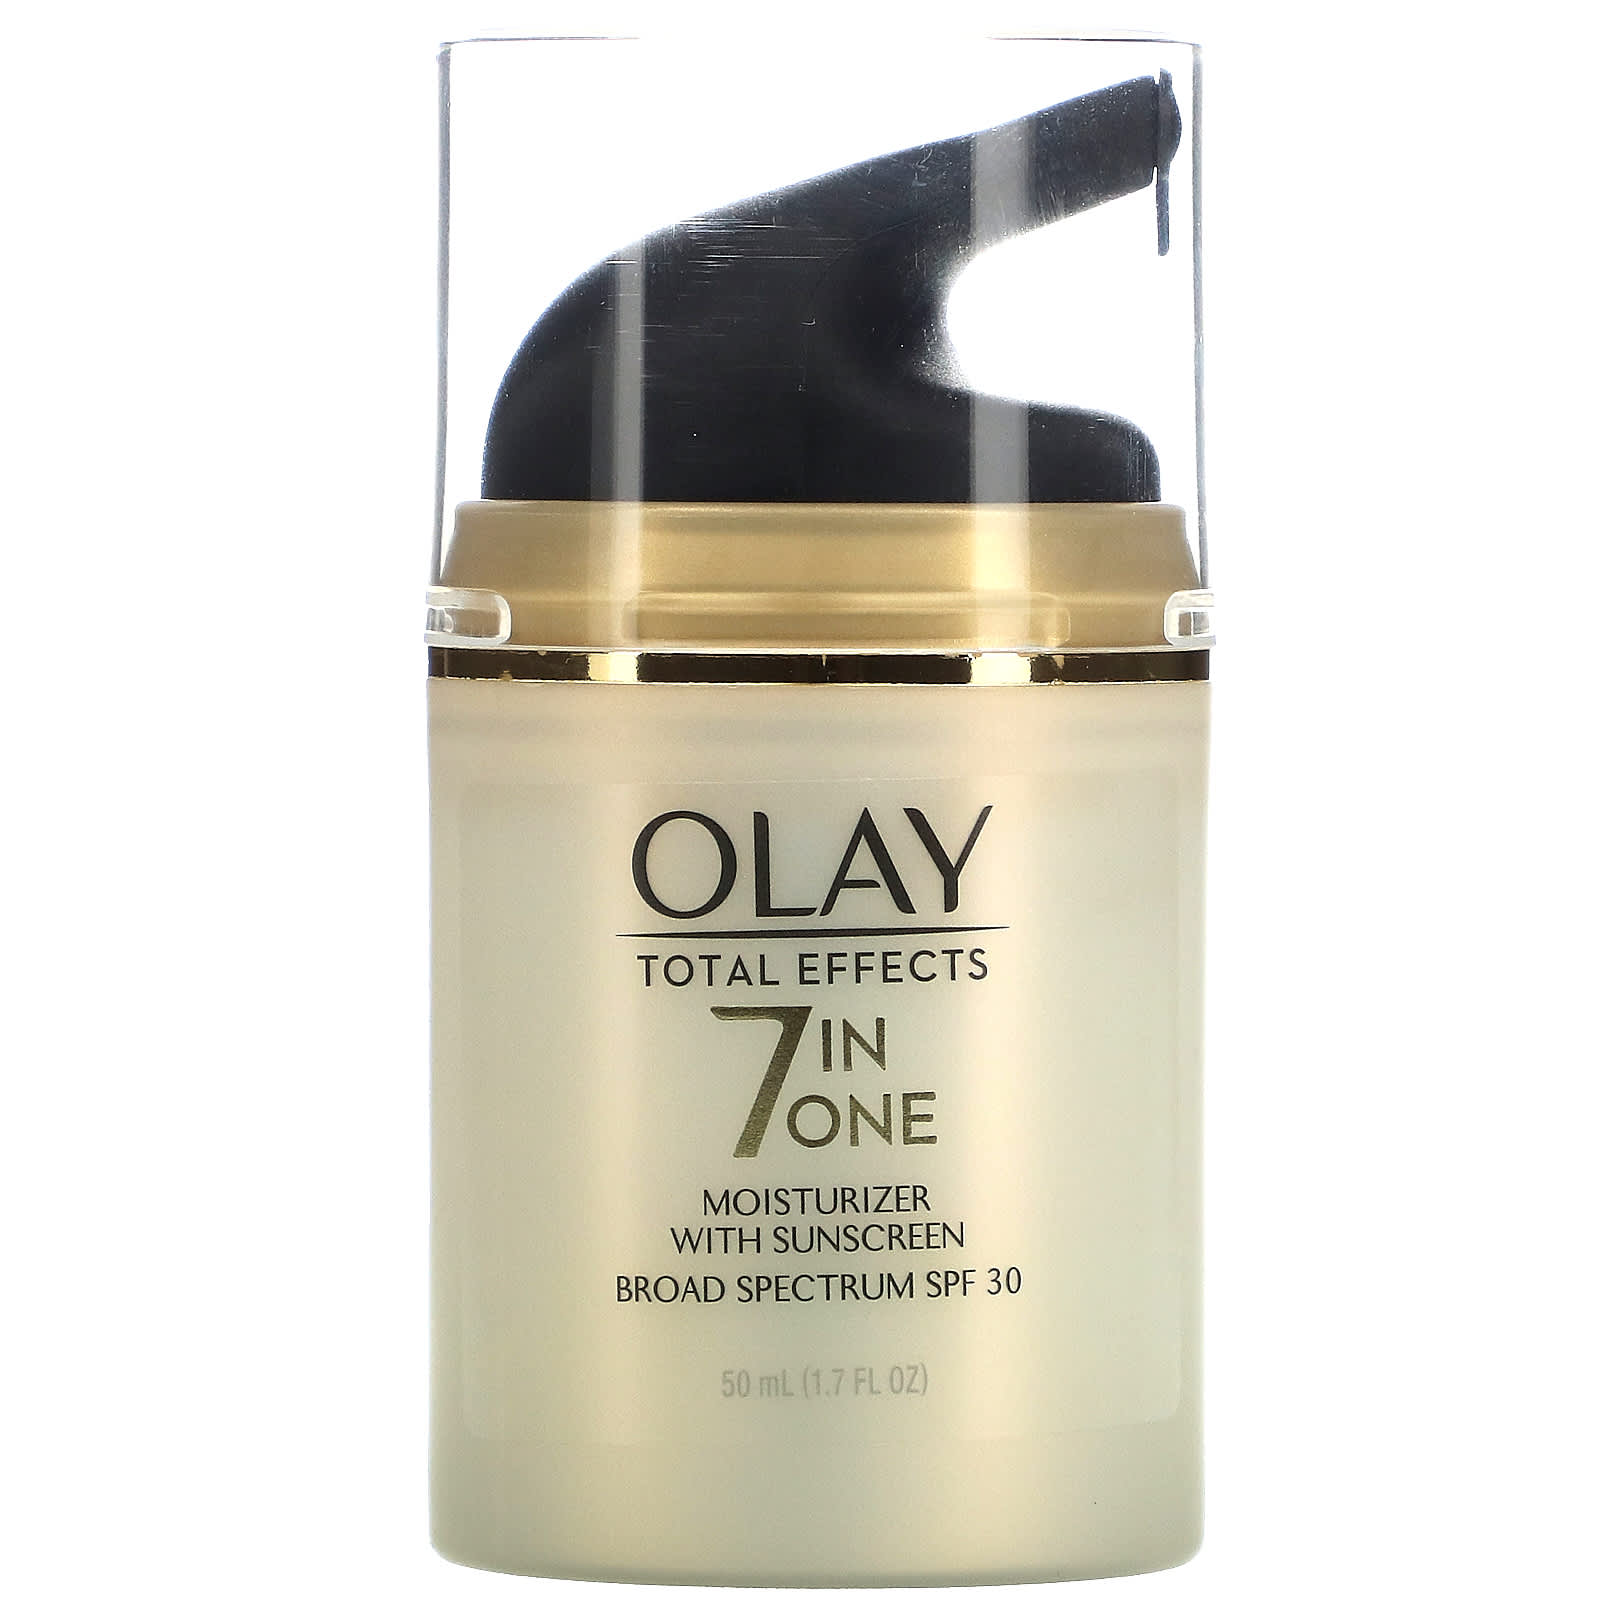 Olay, Total Effects, 7-in-One Moisturizer with Sunscreen, SPF 30 (50 ml)